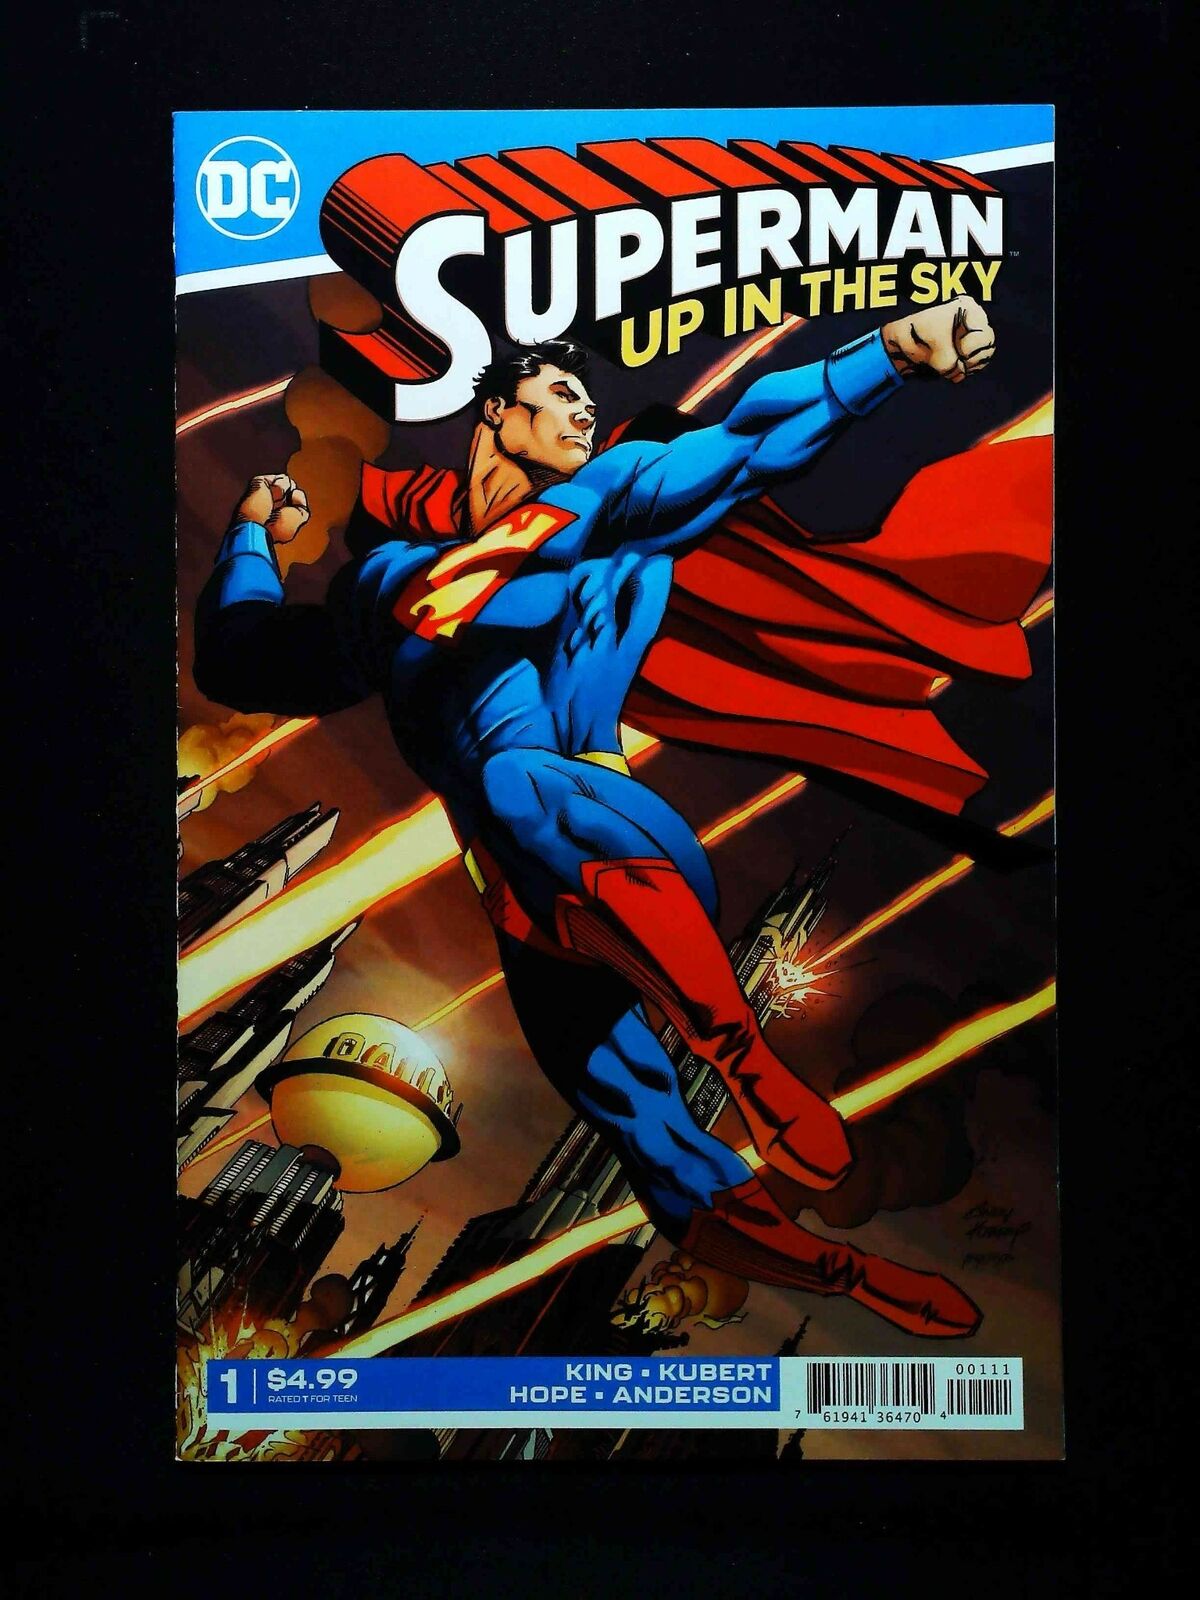 SUPERMAN UP IN THE SKY #1  DC COMICS 2019 VF/NM